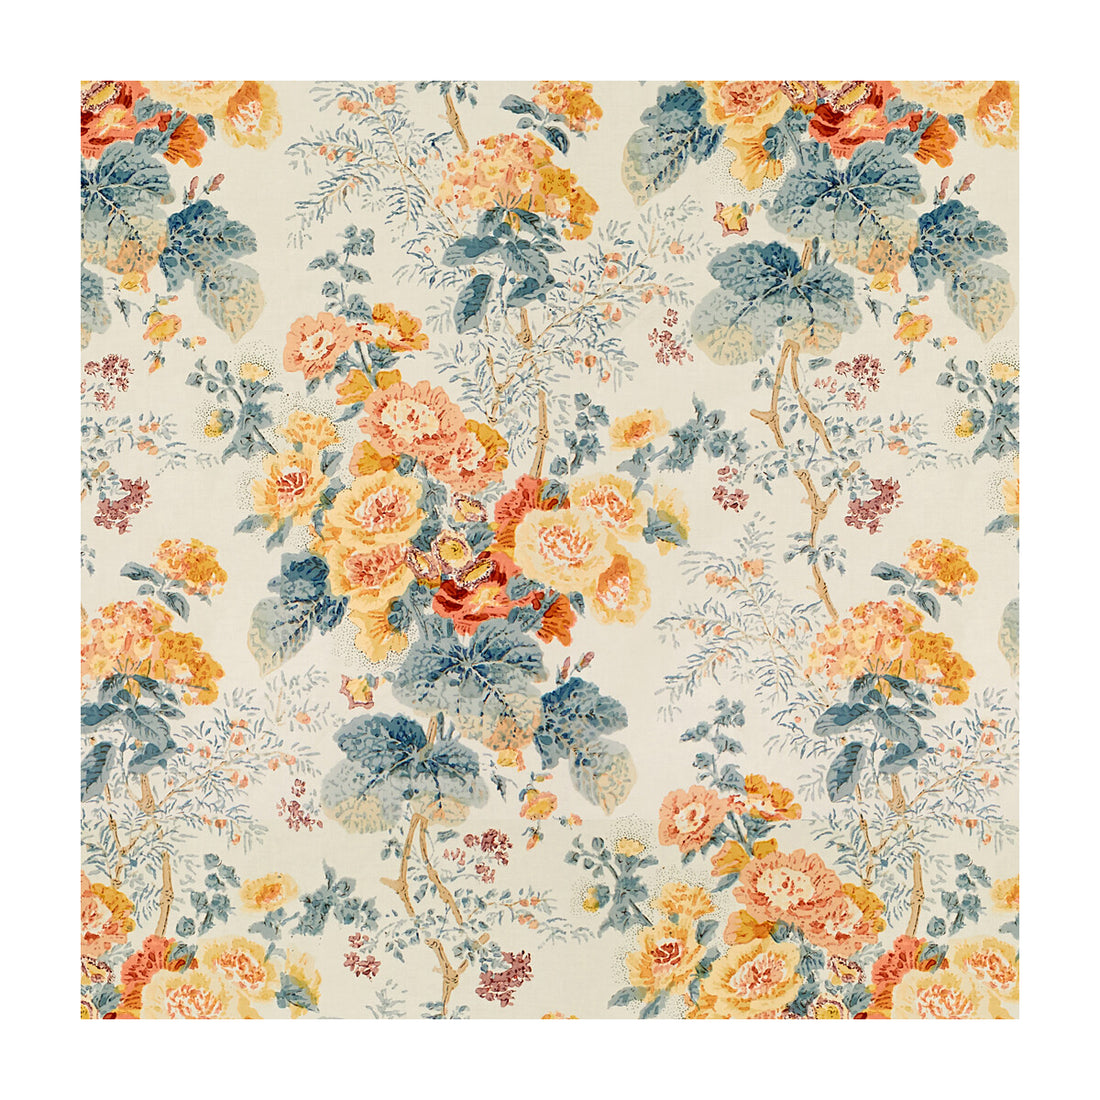 Hollyhock Hdb fabric in apricot/lake color - pattern 2005100.512.0 - by Lee Jofa